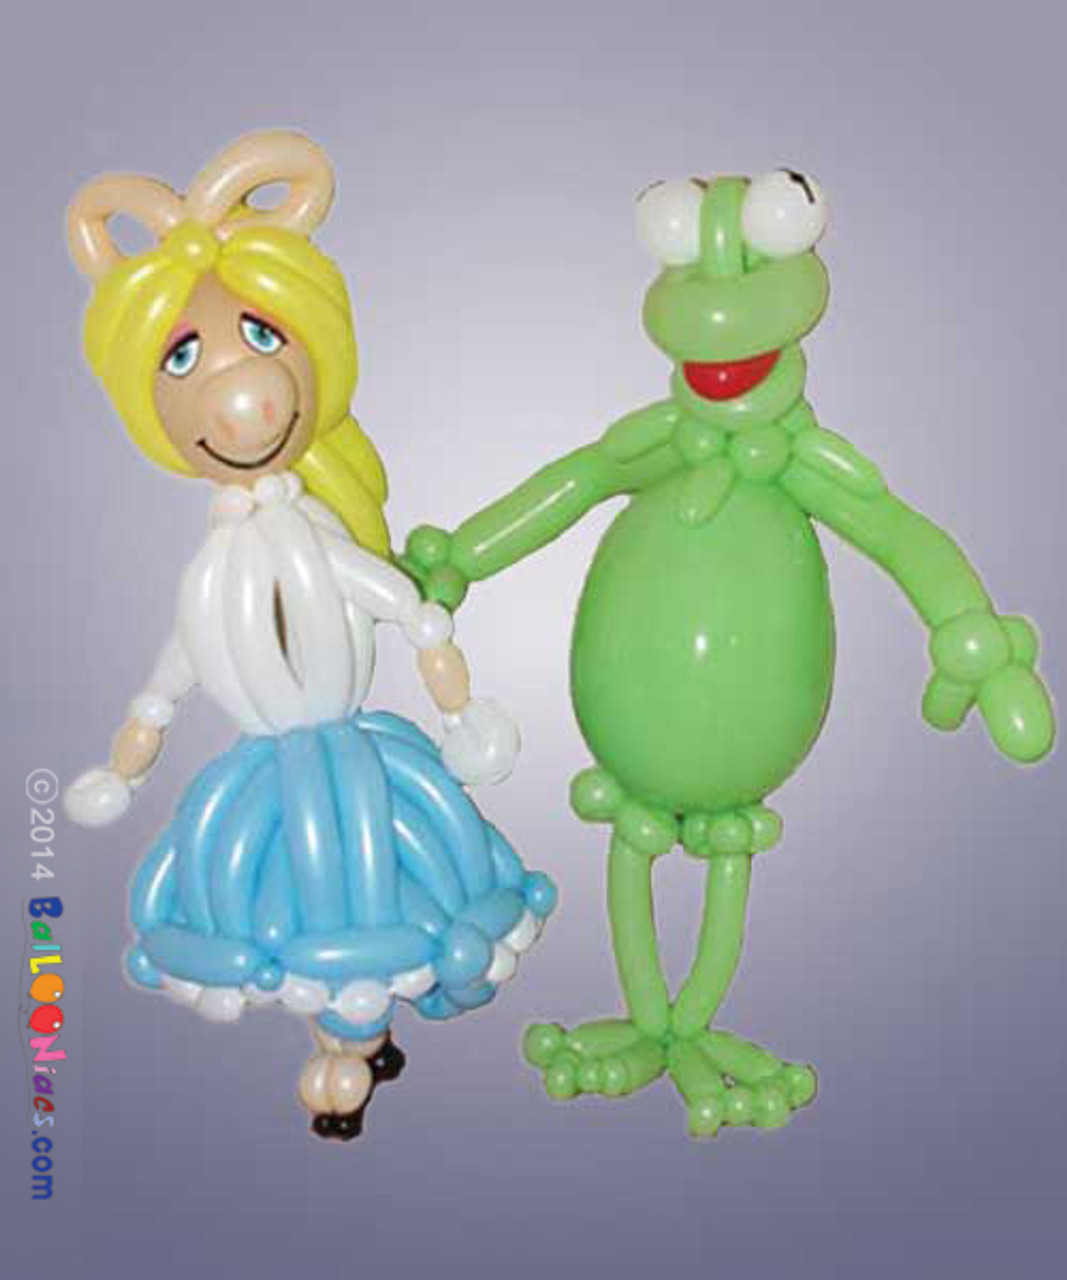 miss piggy and kermit kissing